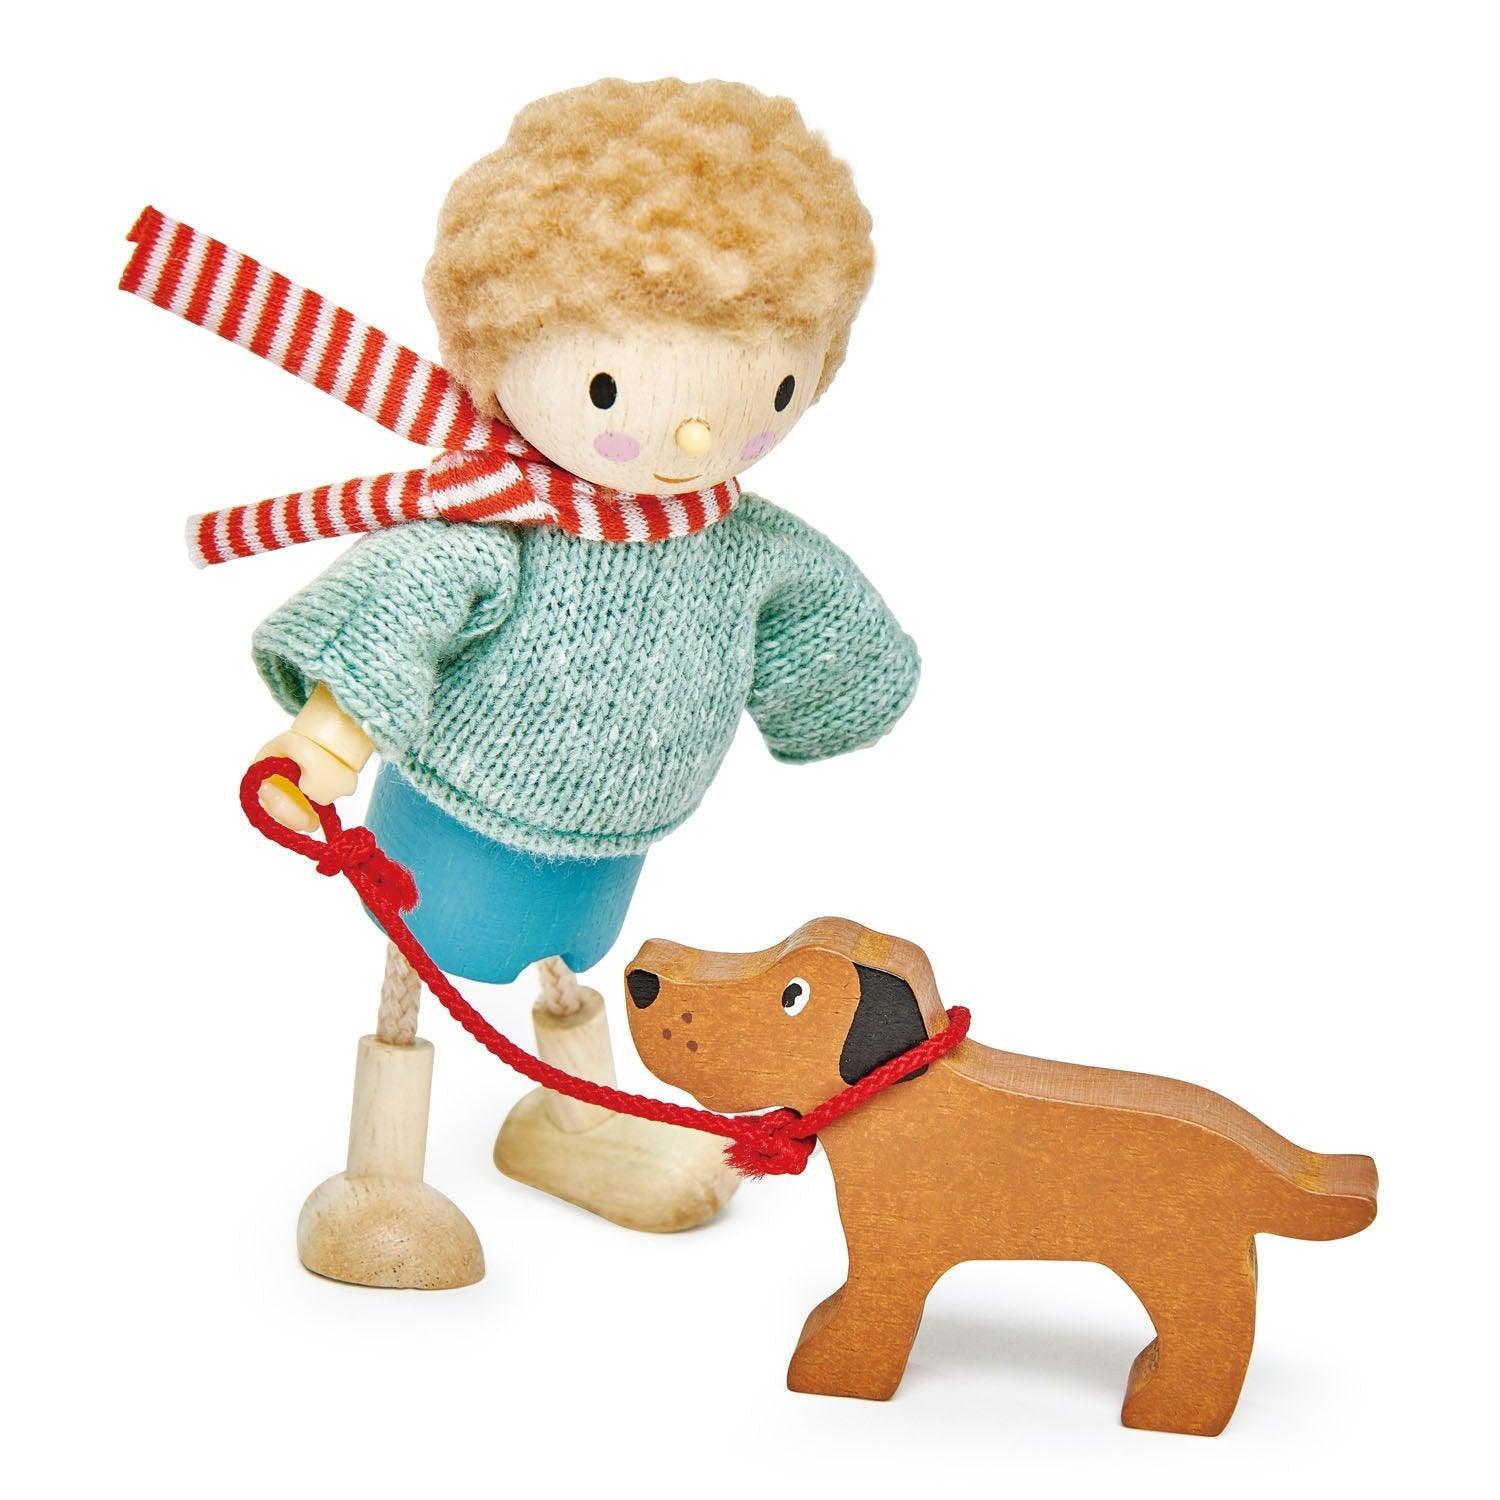 Tender Leaf Toys: Mr. Goodwood and his dog doll